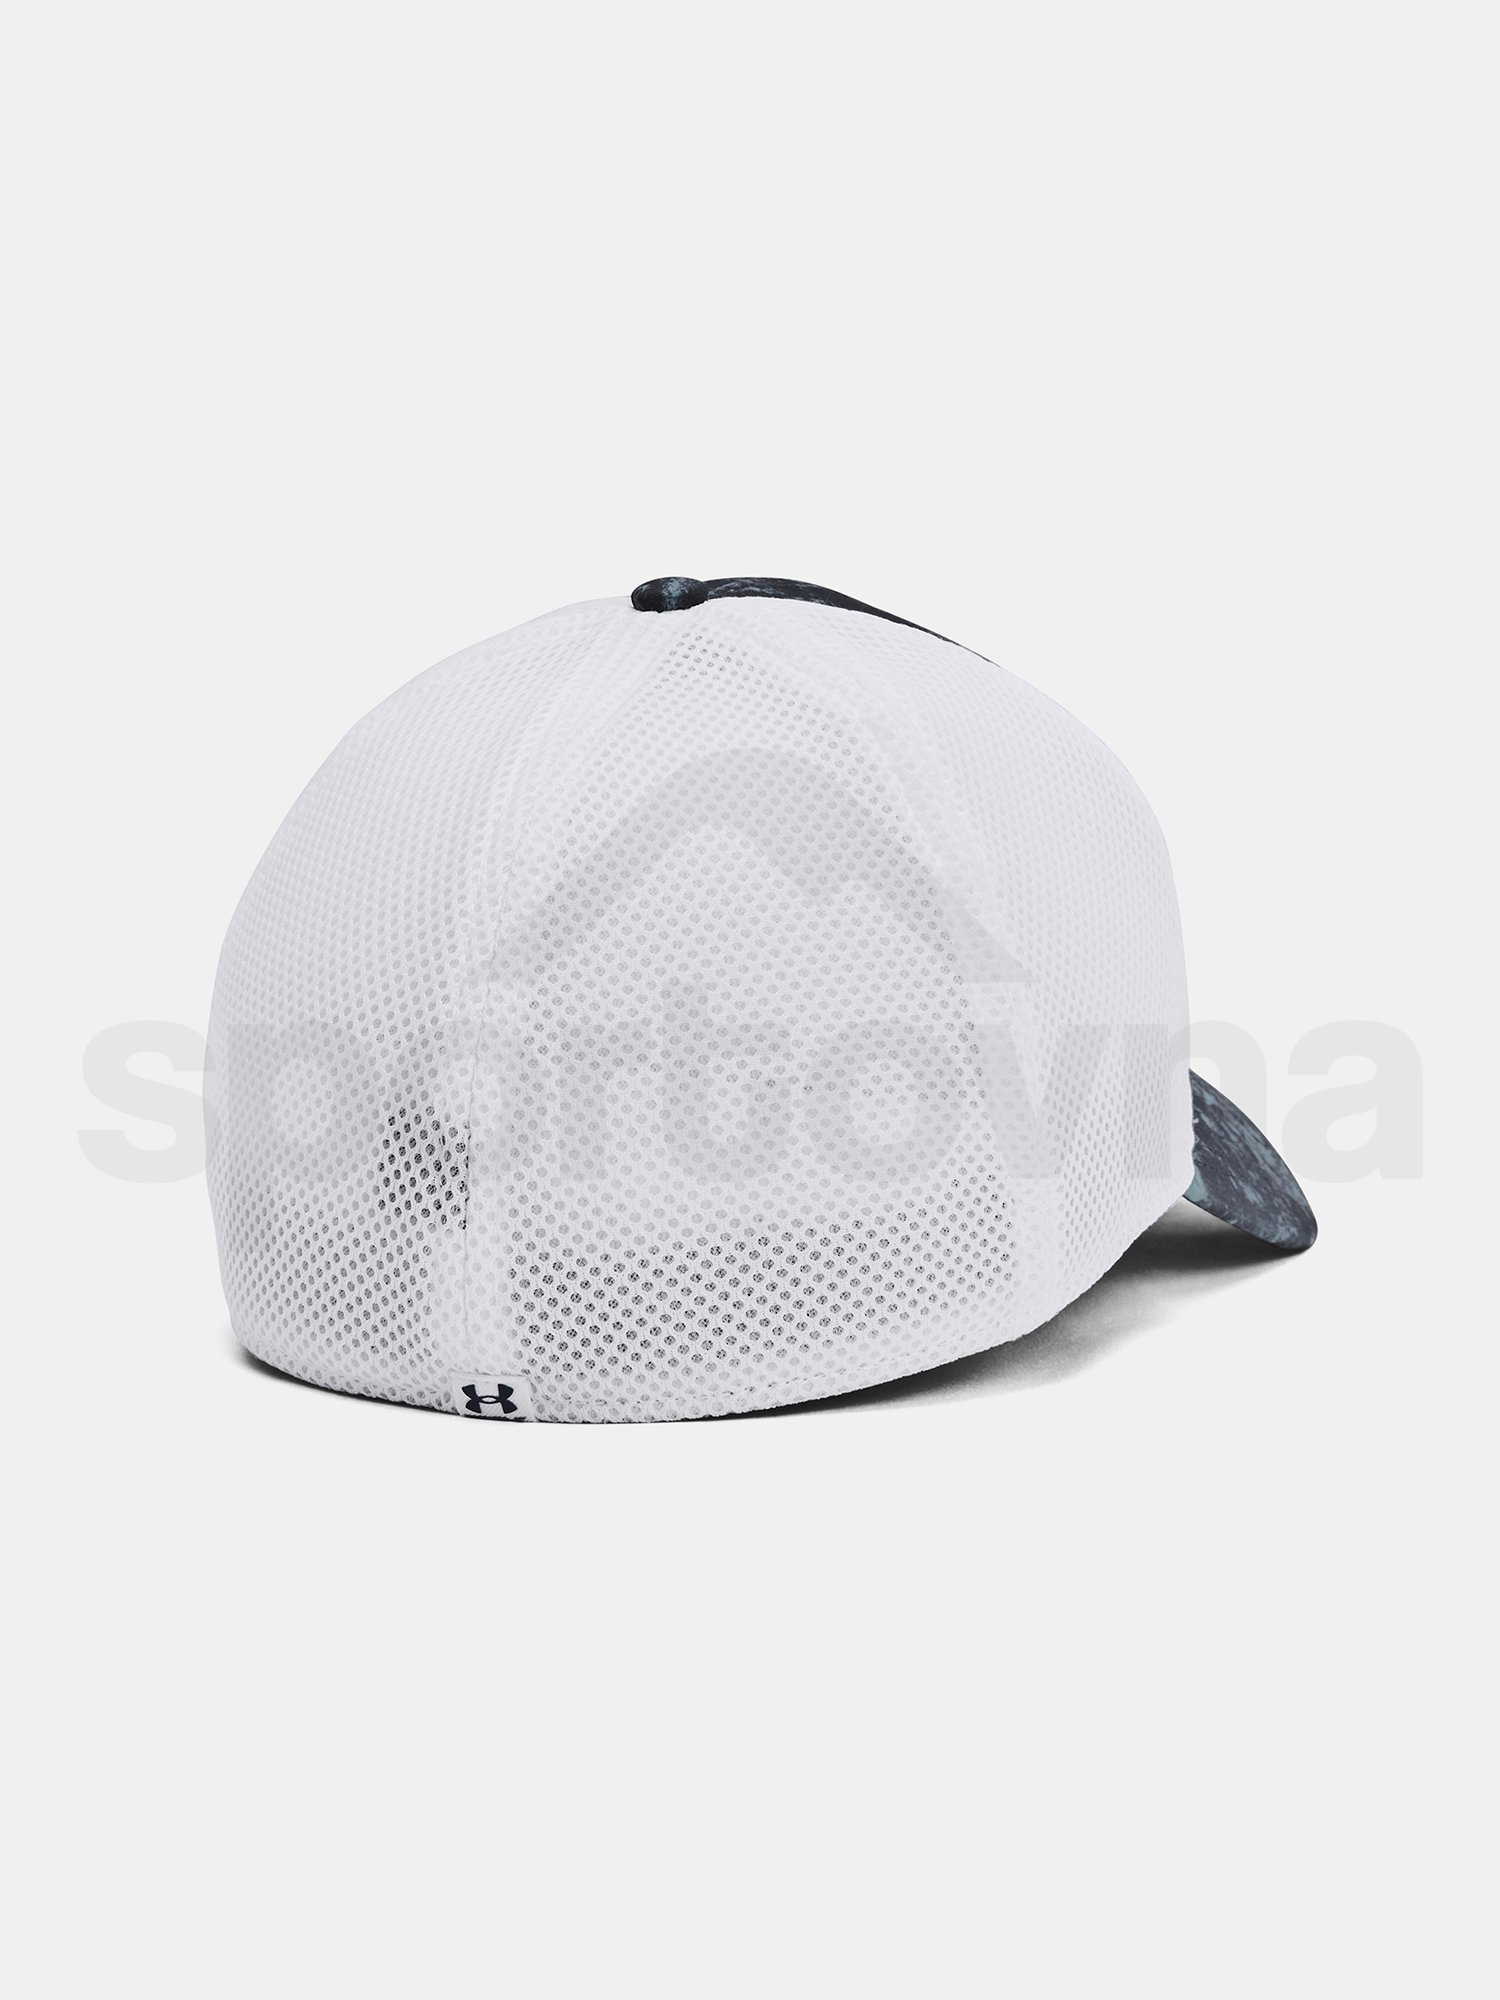 Kšiltovka Under Armour Iso-chill Driver Mesh-GRY